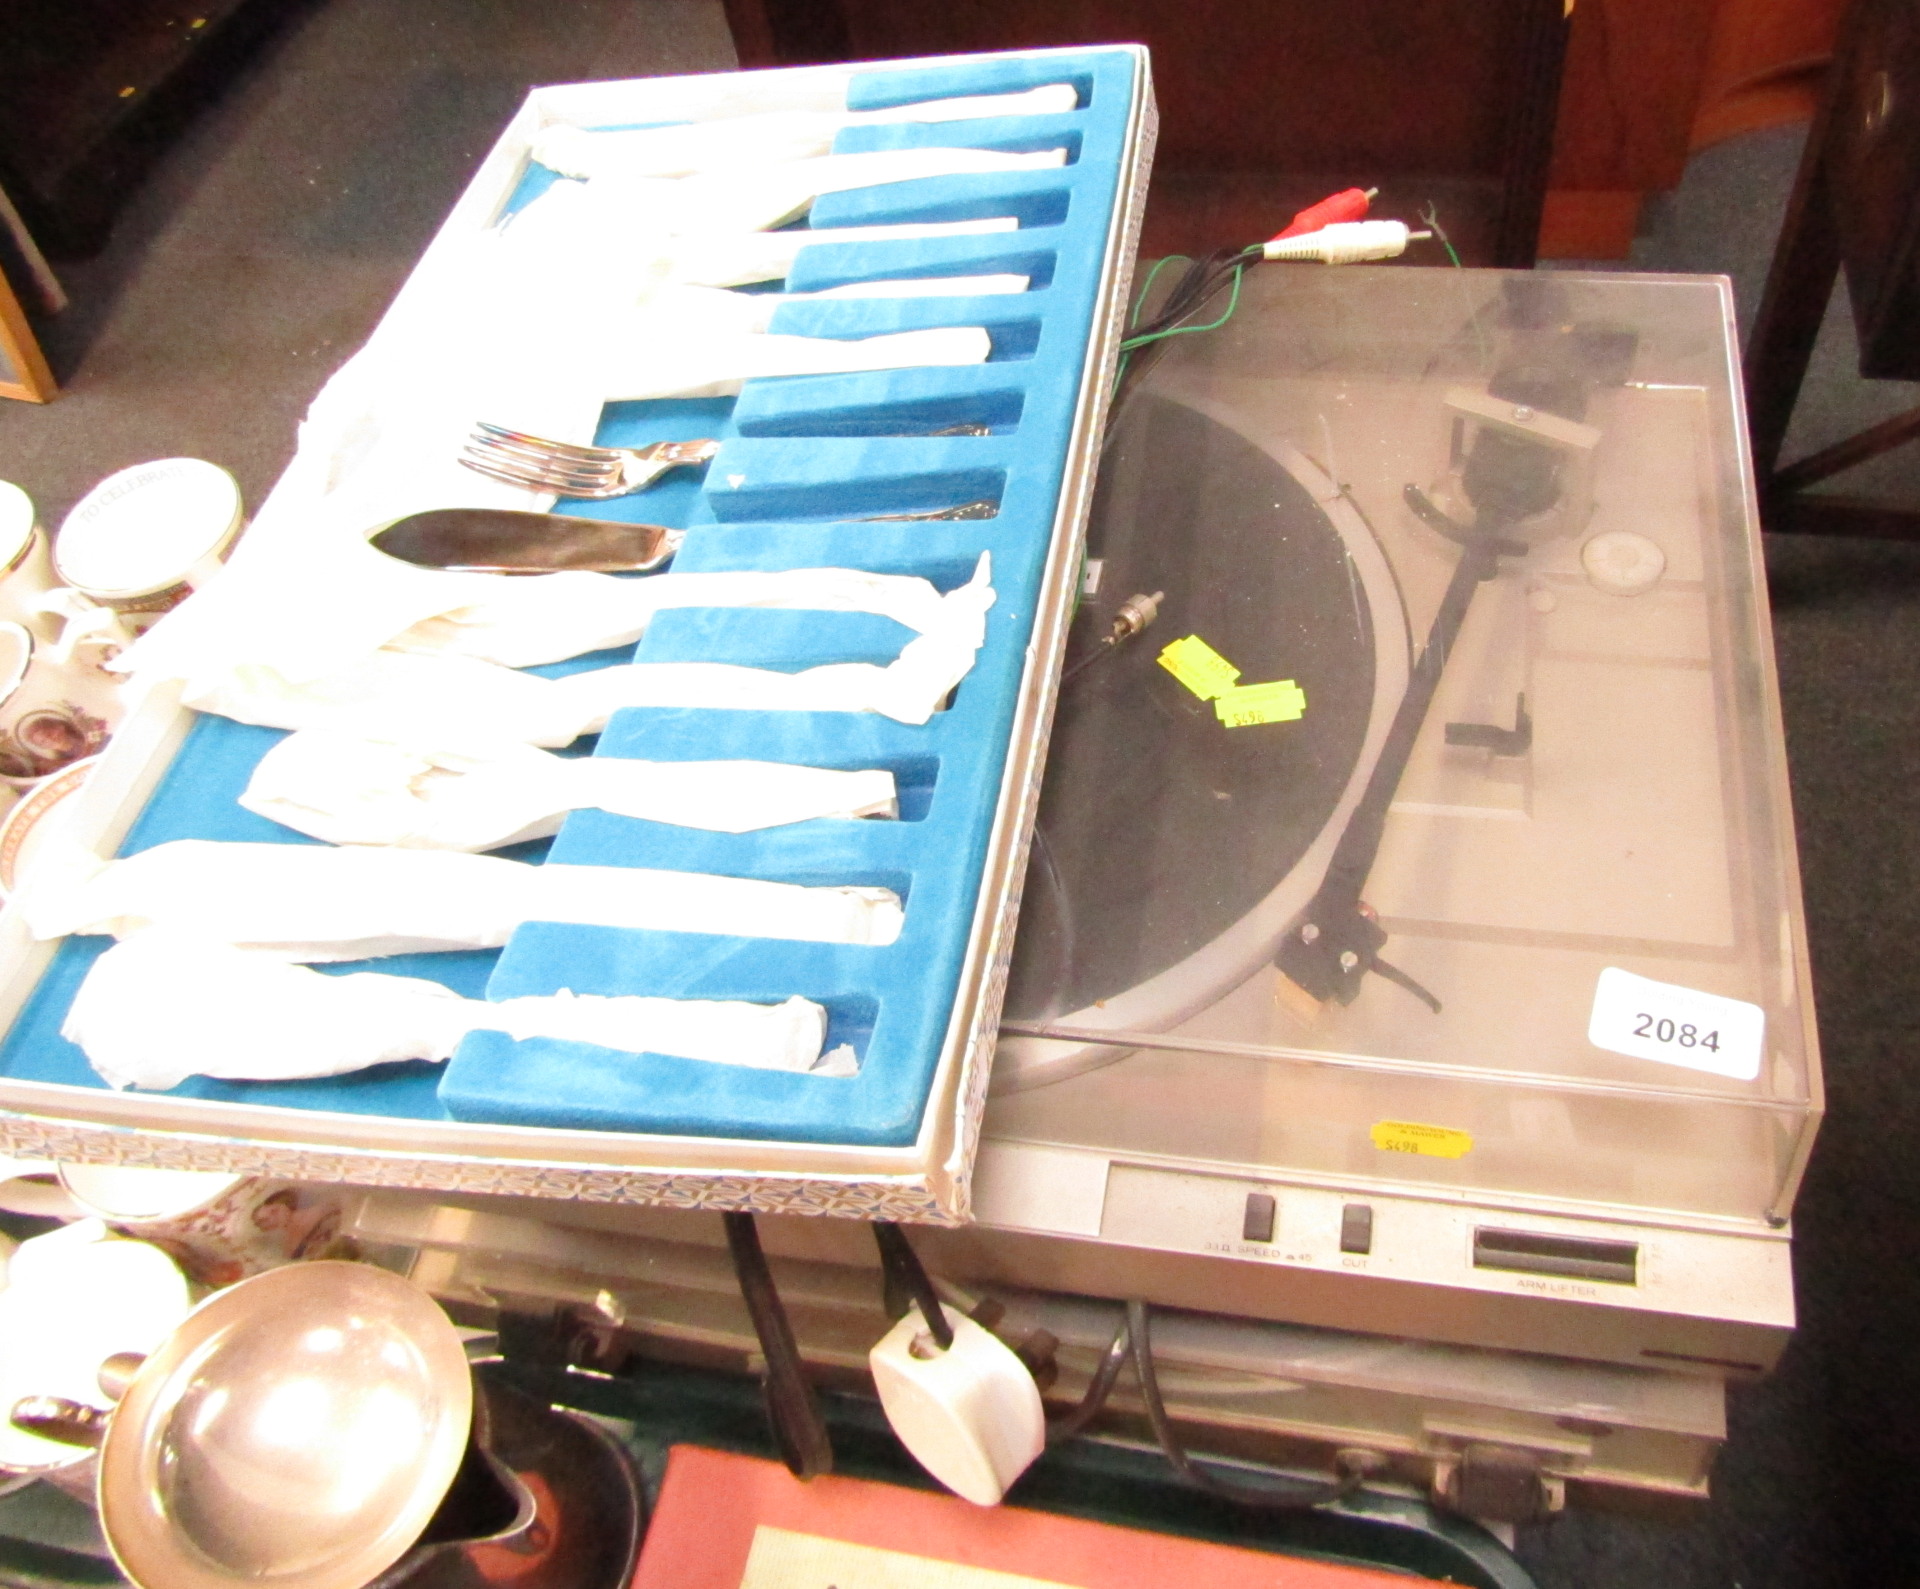 Two Hitachi record players and a case of boxed cutlery. (3)